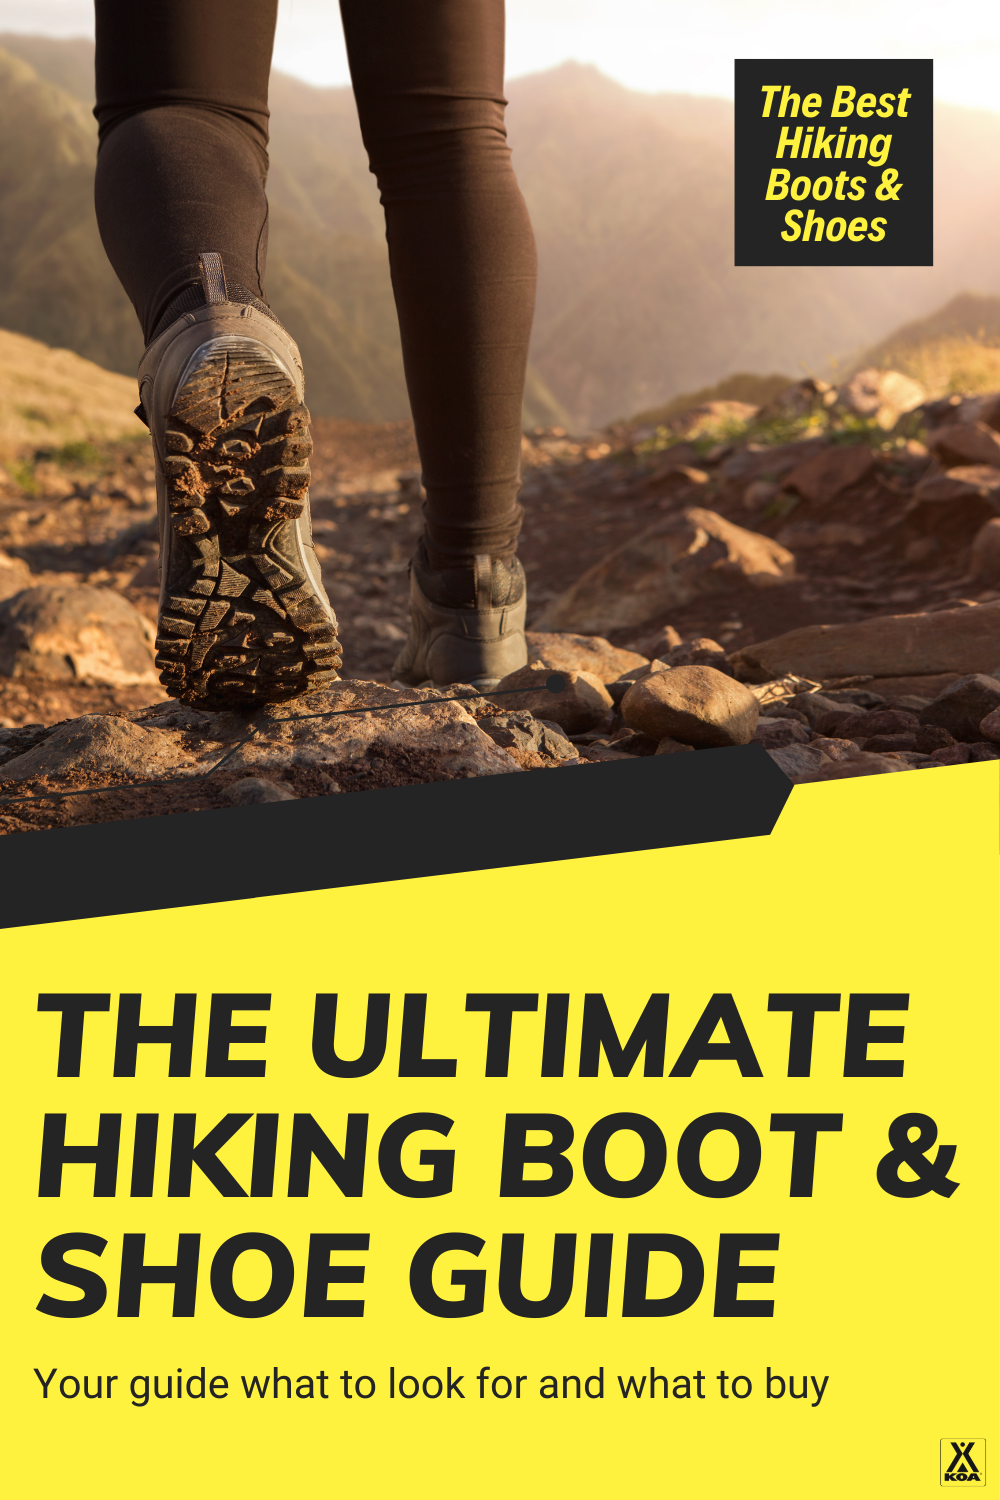 When you're out hiking and exploring choosing the right footwear can make all the difference. Use our guide to learn what to look for when buying a hiking boot or shoe as well as see some of our favorite hiking footwear.